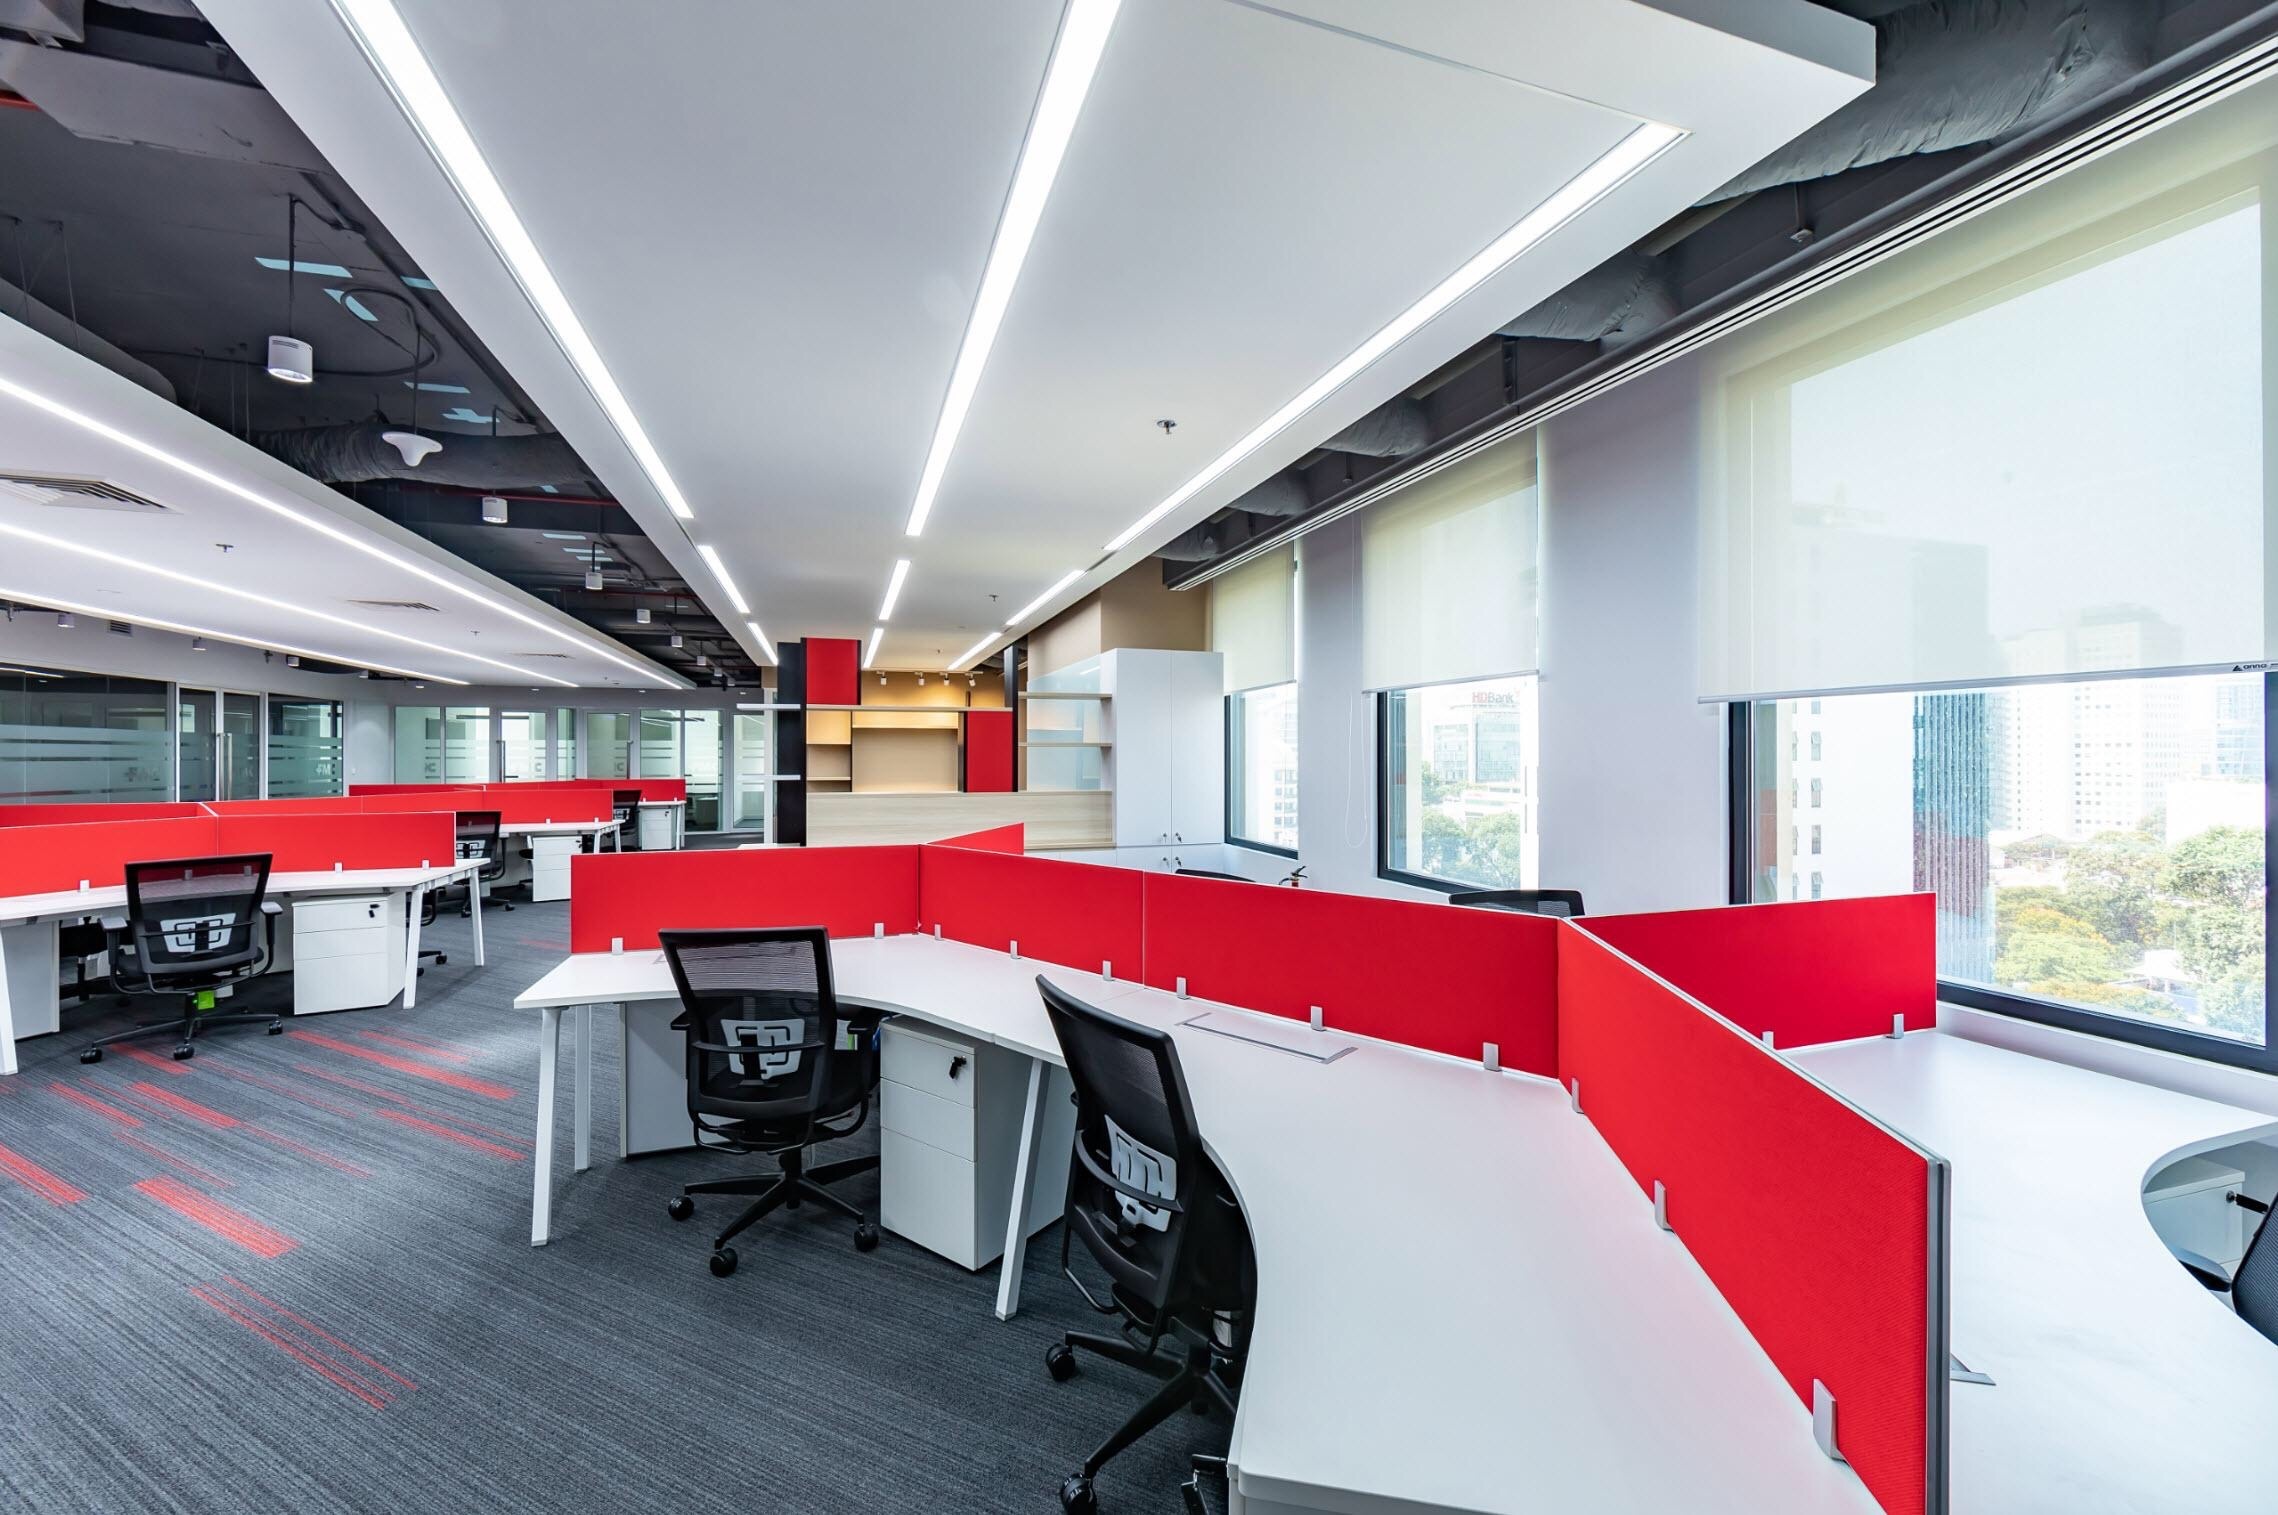 Artiv workstations in red panels with Presa office chairs